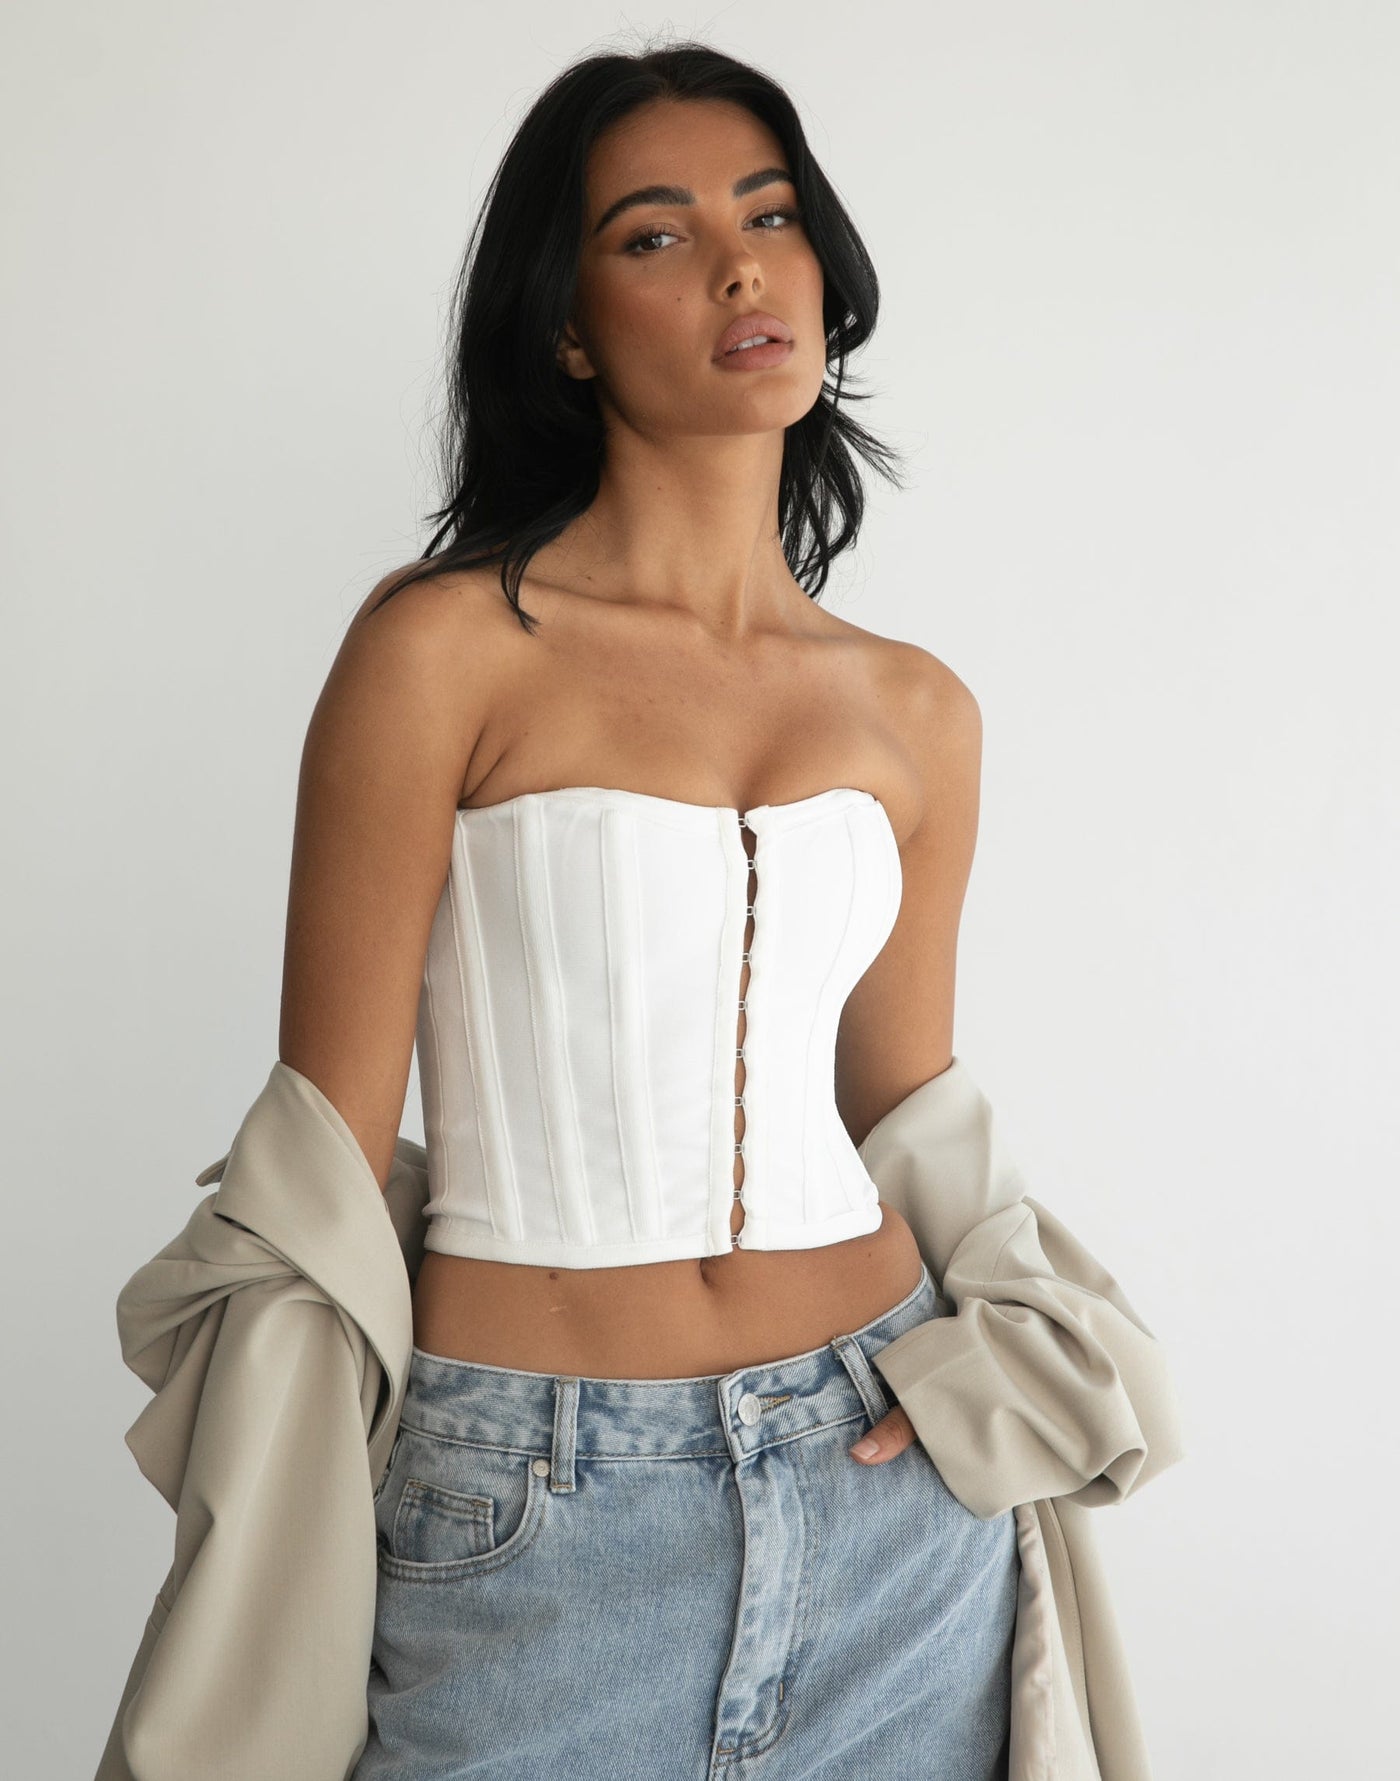 Passion Corset Top (White) - White Corset Crop Top - Women's Top - Charcoal Clothing